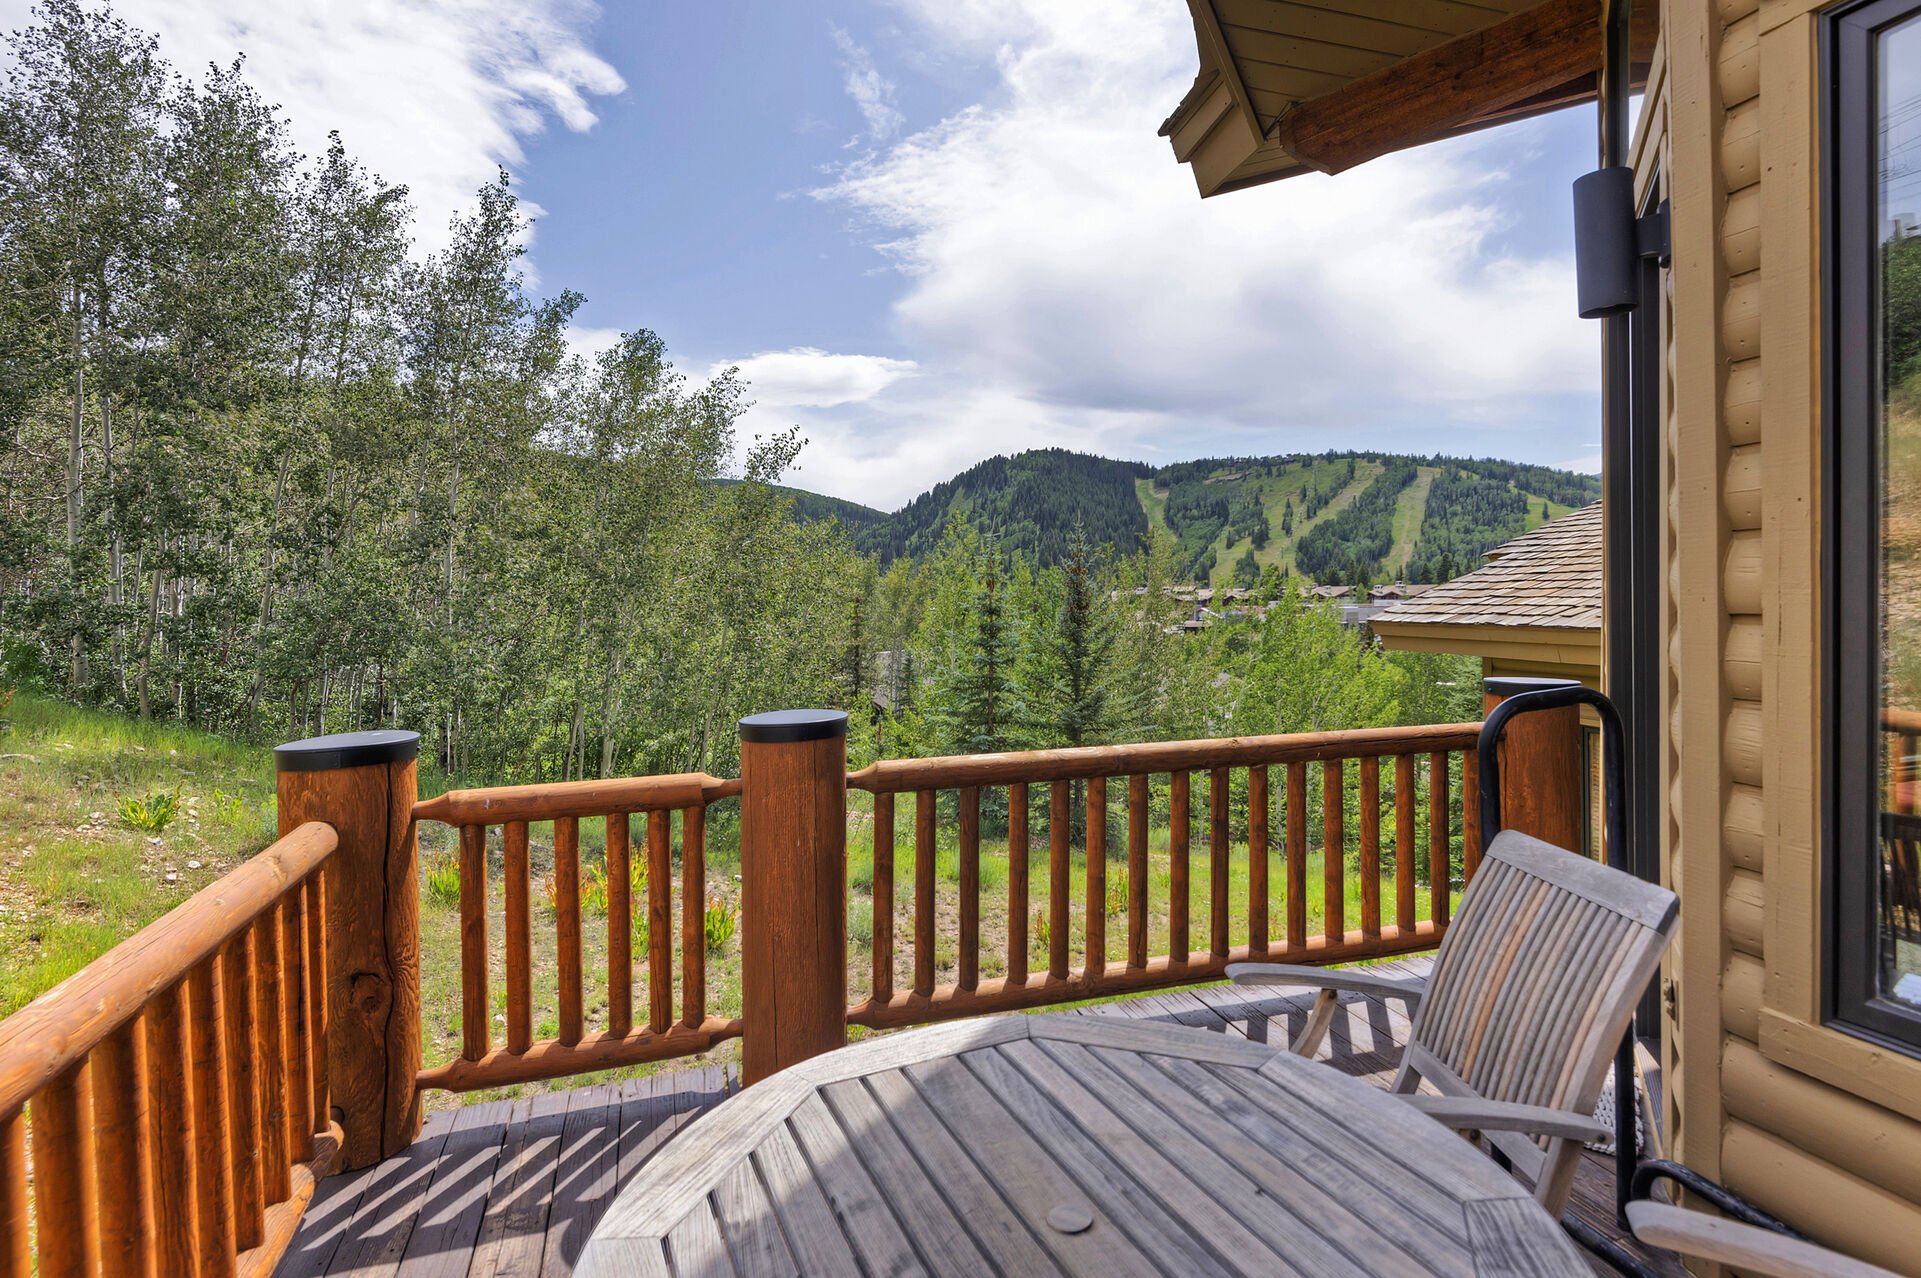 Take in the Views and the Fresh Mountain Air